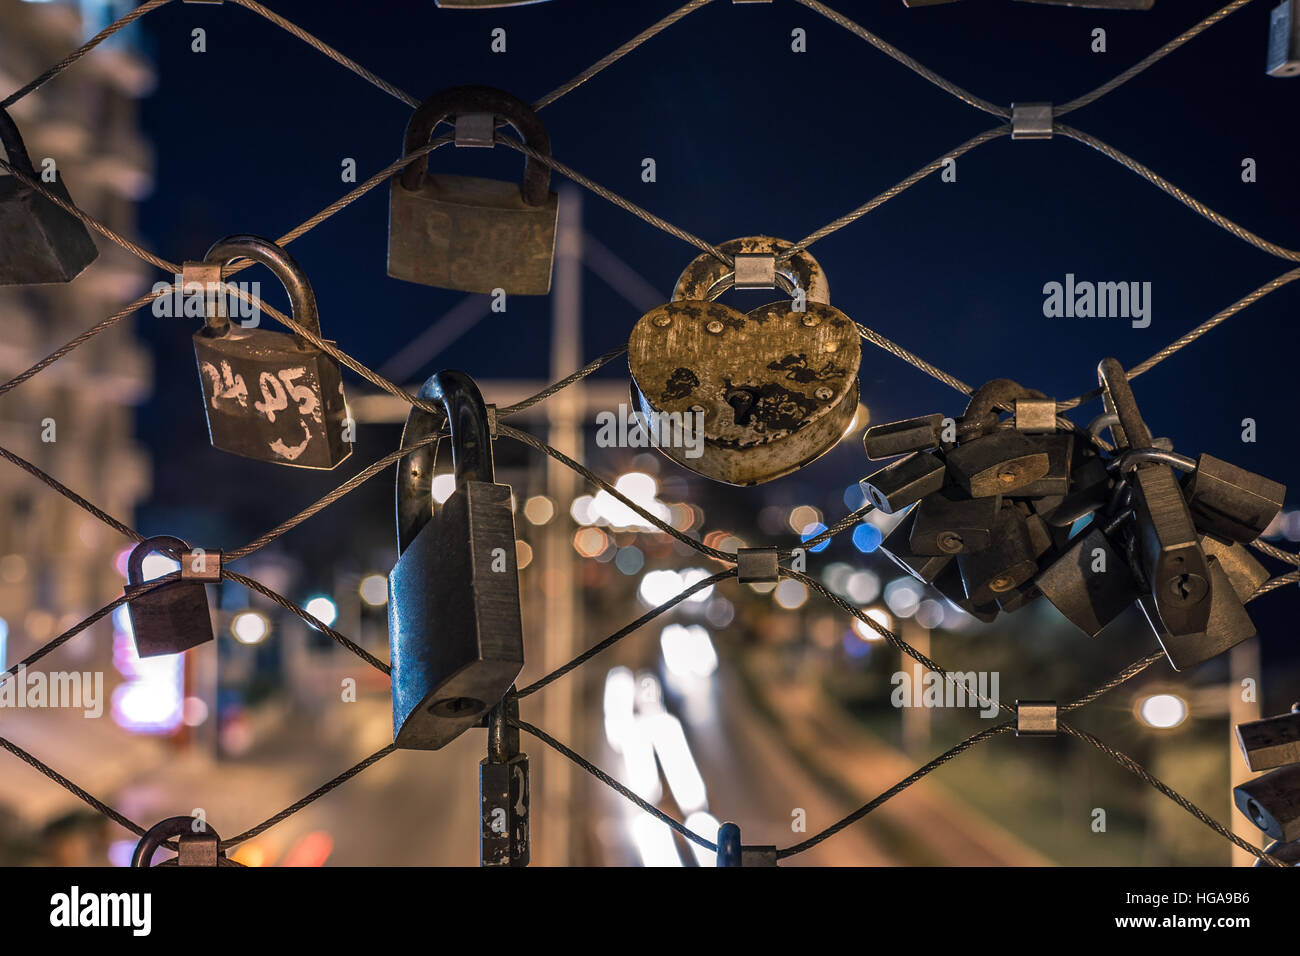 Locks on a metal wire fence with car light trails in the background Stock Photo